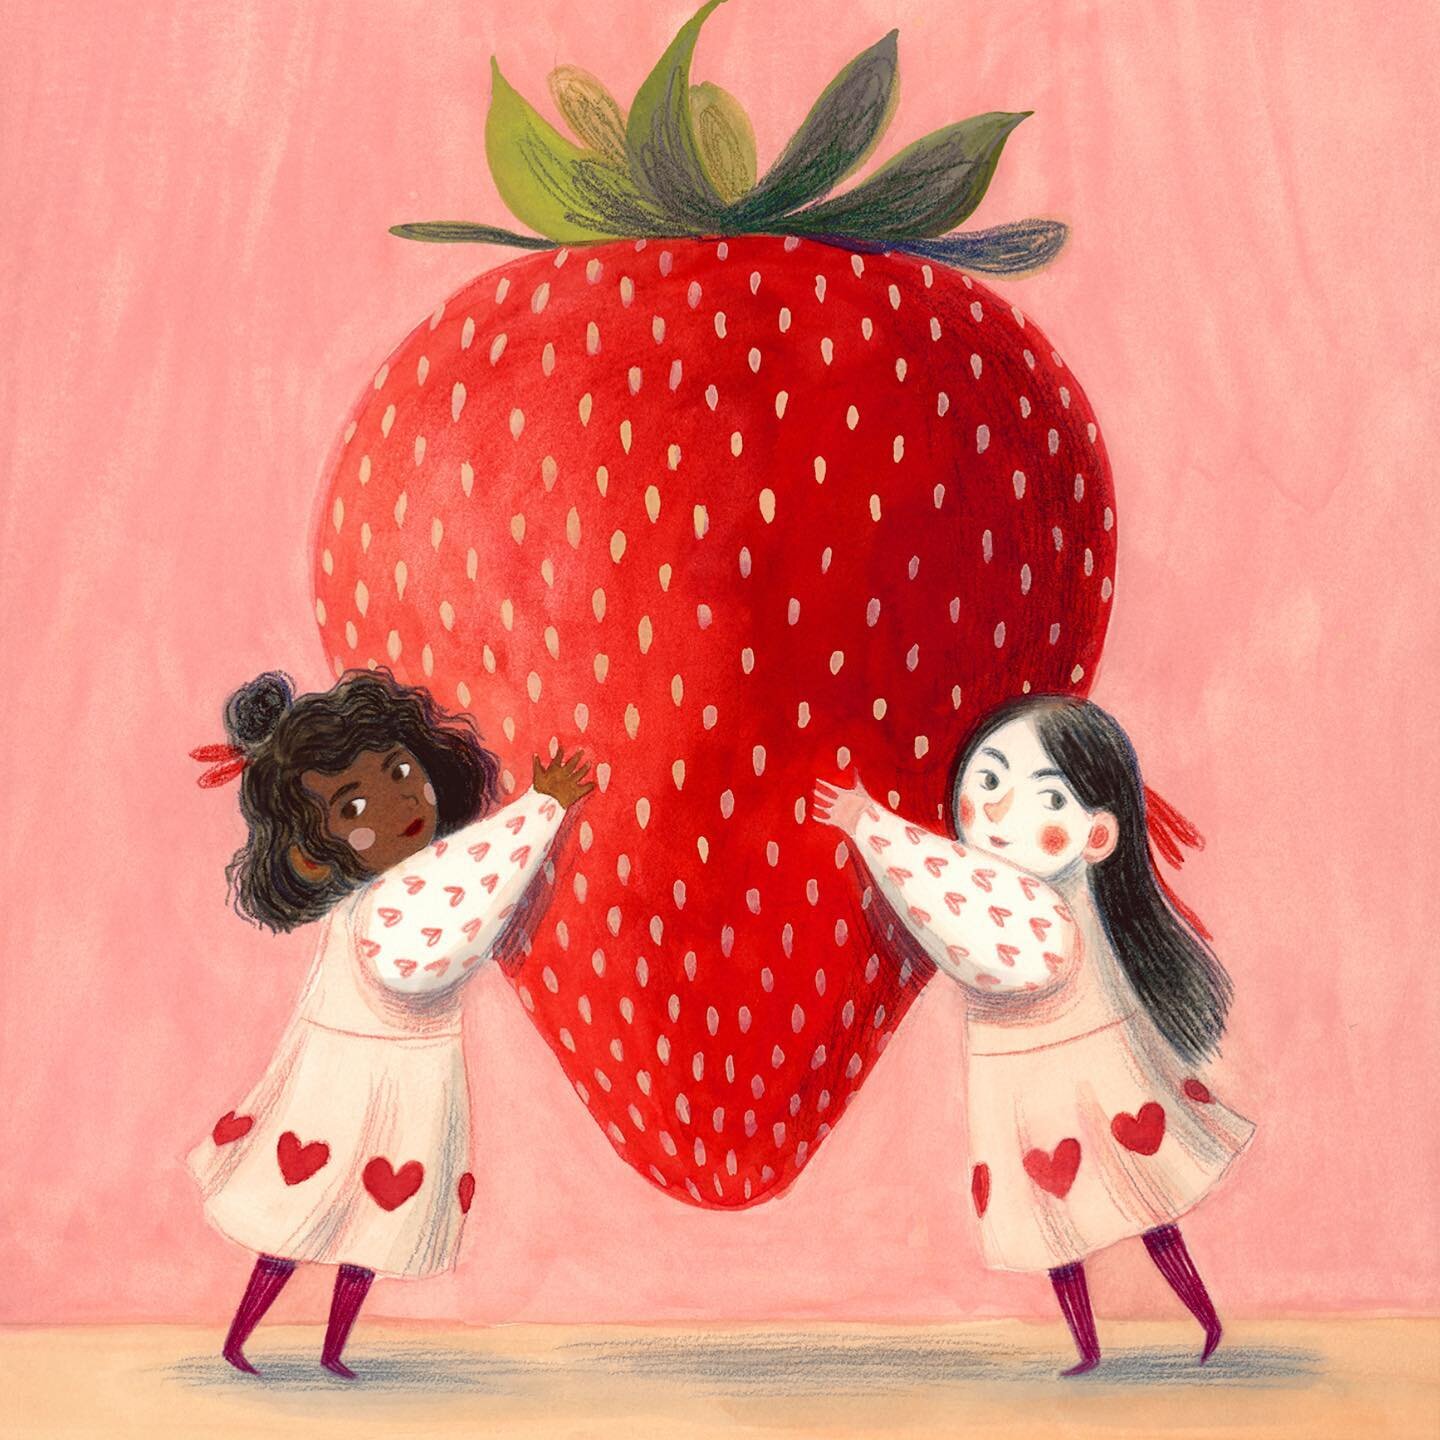 My feed doesn&rsquo;t have enough pink or red for February so here is this! And oldie but goodie. I really, really love pink, don&rsquo;t you? Made with #holbeingouache and #fabercastellpolychromos pencils. ❤️🍓🌸❤️
.
.
.
.
#picturebookart #kidlitill